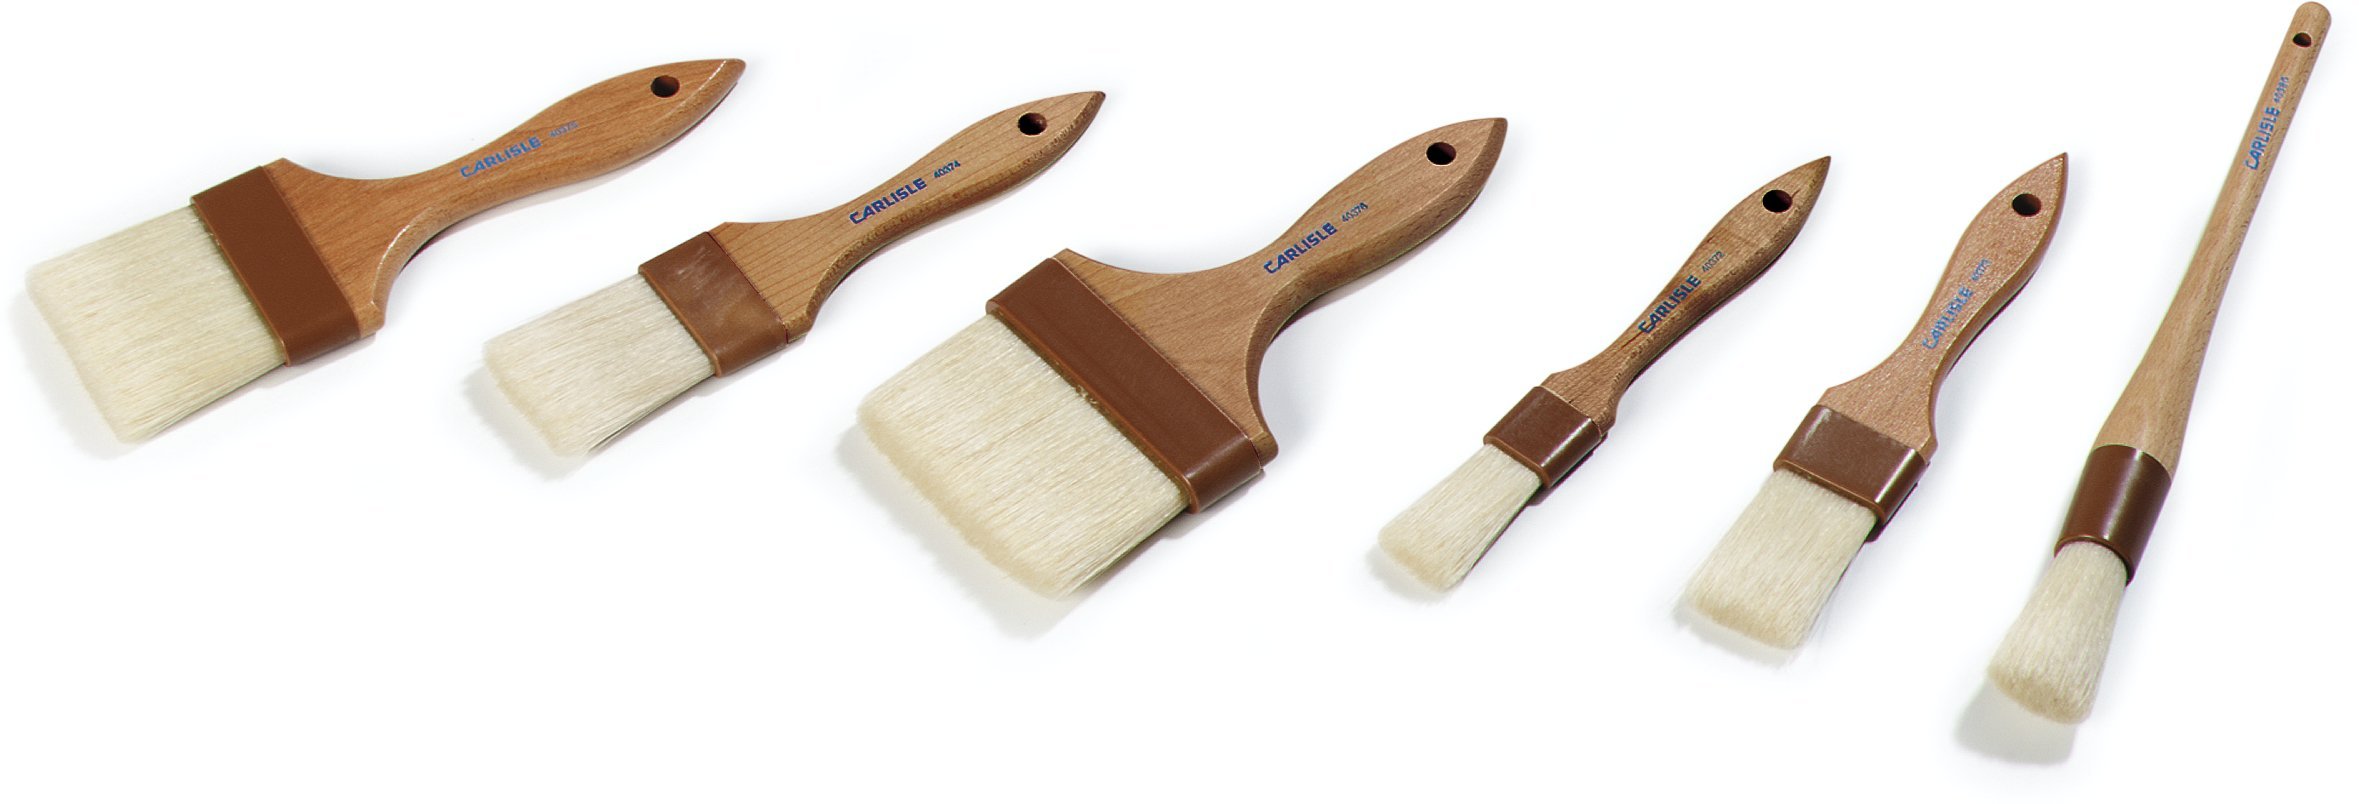 SPARTA 4038000 Boarhair Round Brush, Ergonomic Shape With Studry Wood Handle, 1 Inch, Brown